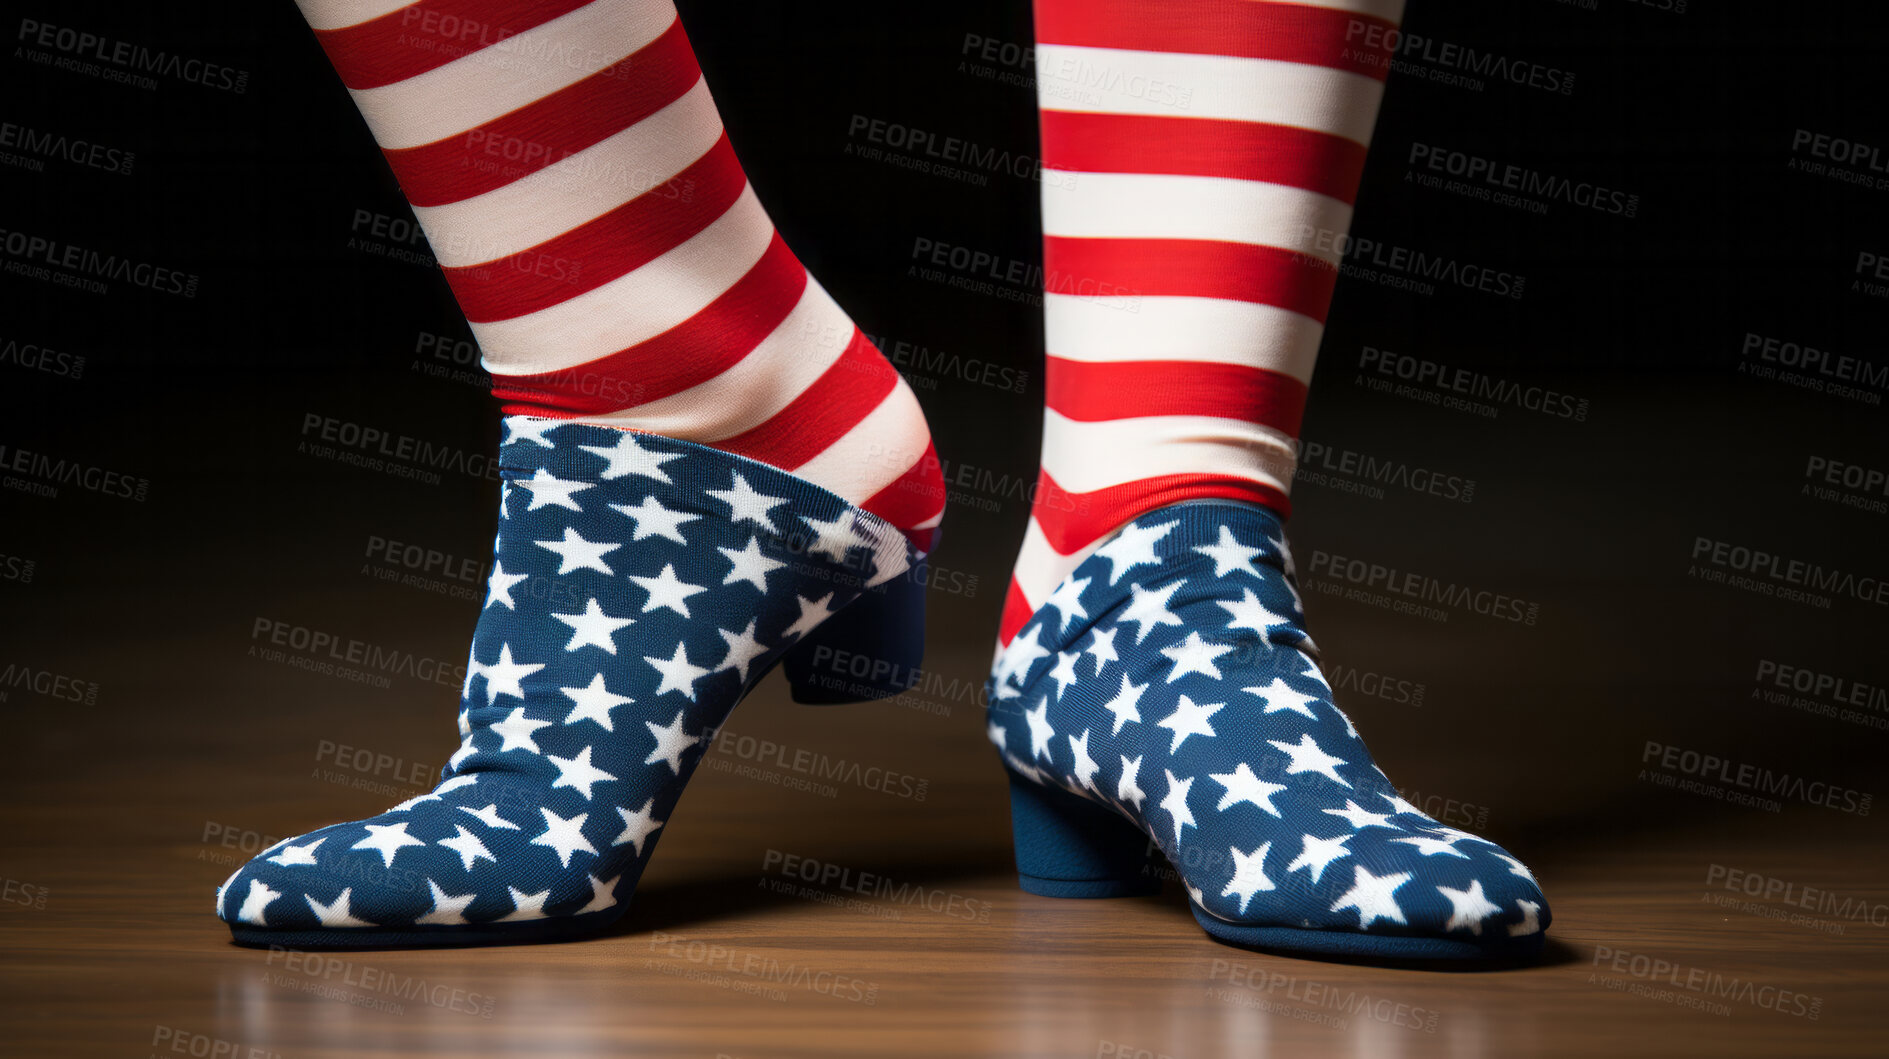 Buy stock photo Patriotic person wearing striped socks and star covered heels.Low angle view, standing on floor.